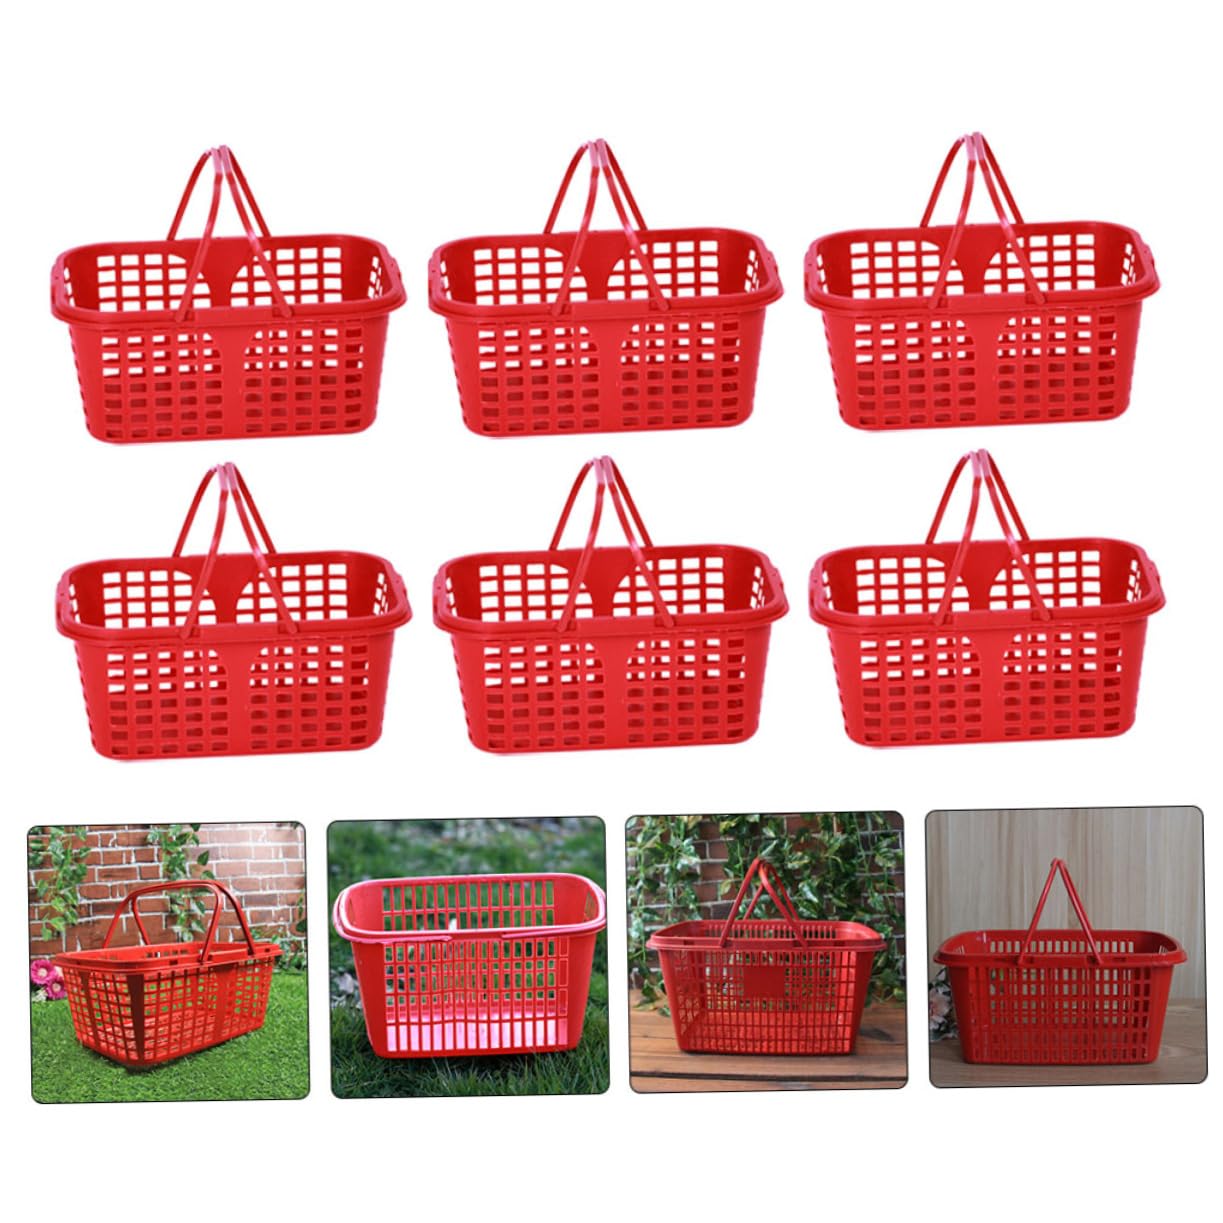 Homoyoyo 20pcs Fruit Picking Basket Kid Snack Container Basket for Snacks Strawberry Baskets Play Shopping Basket Kids Grocery Basket Fruit Basket with Handle Reusable Orange Container Red